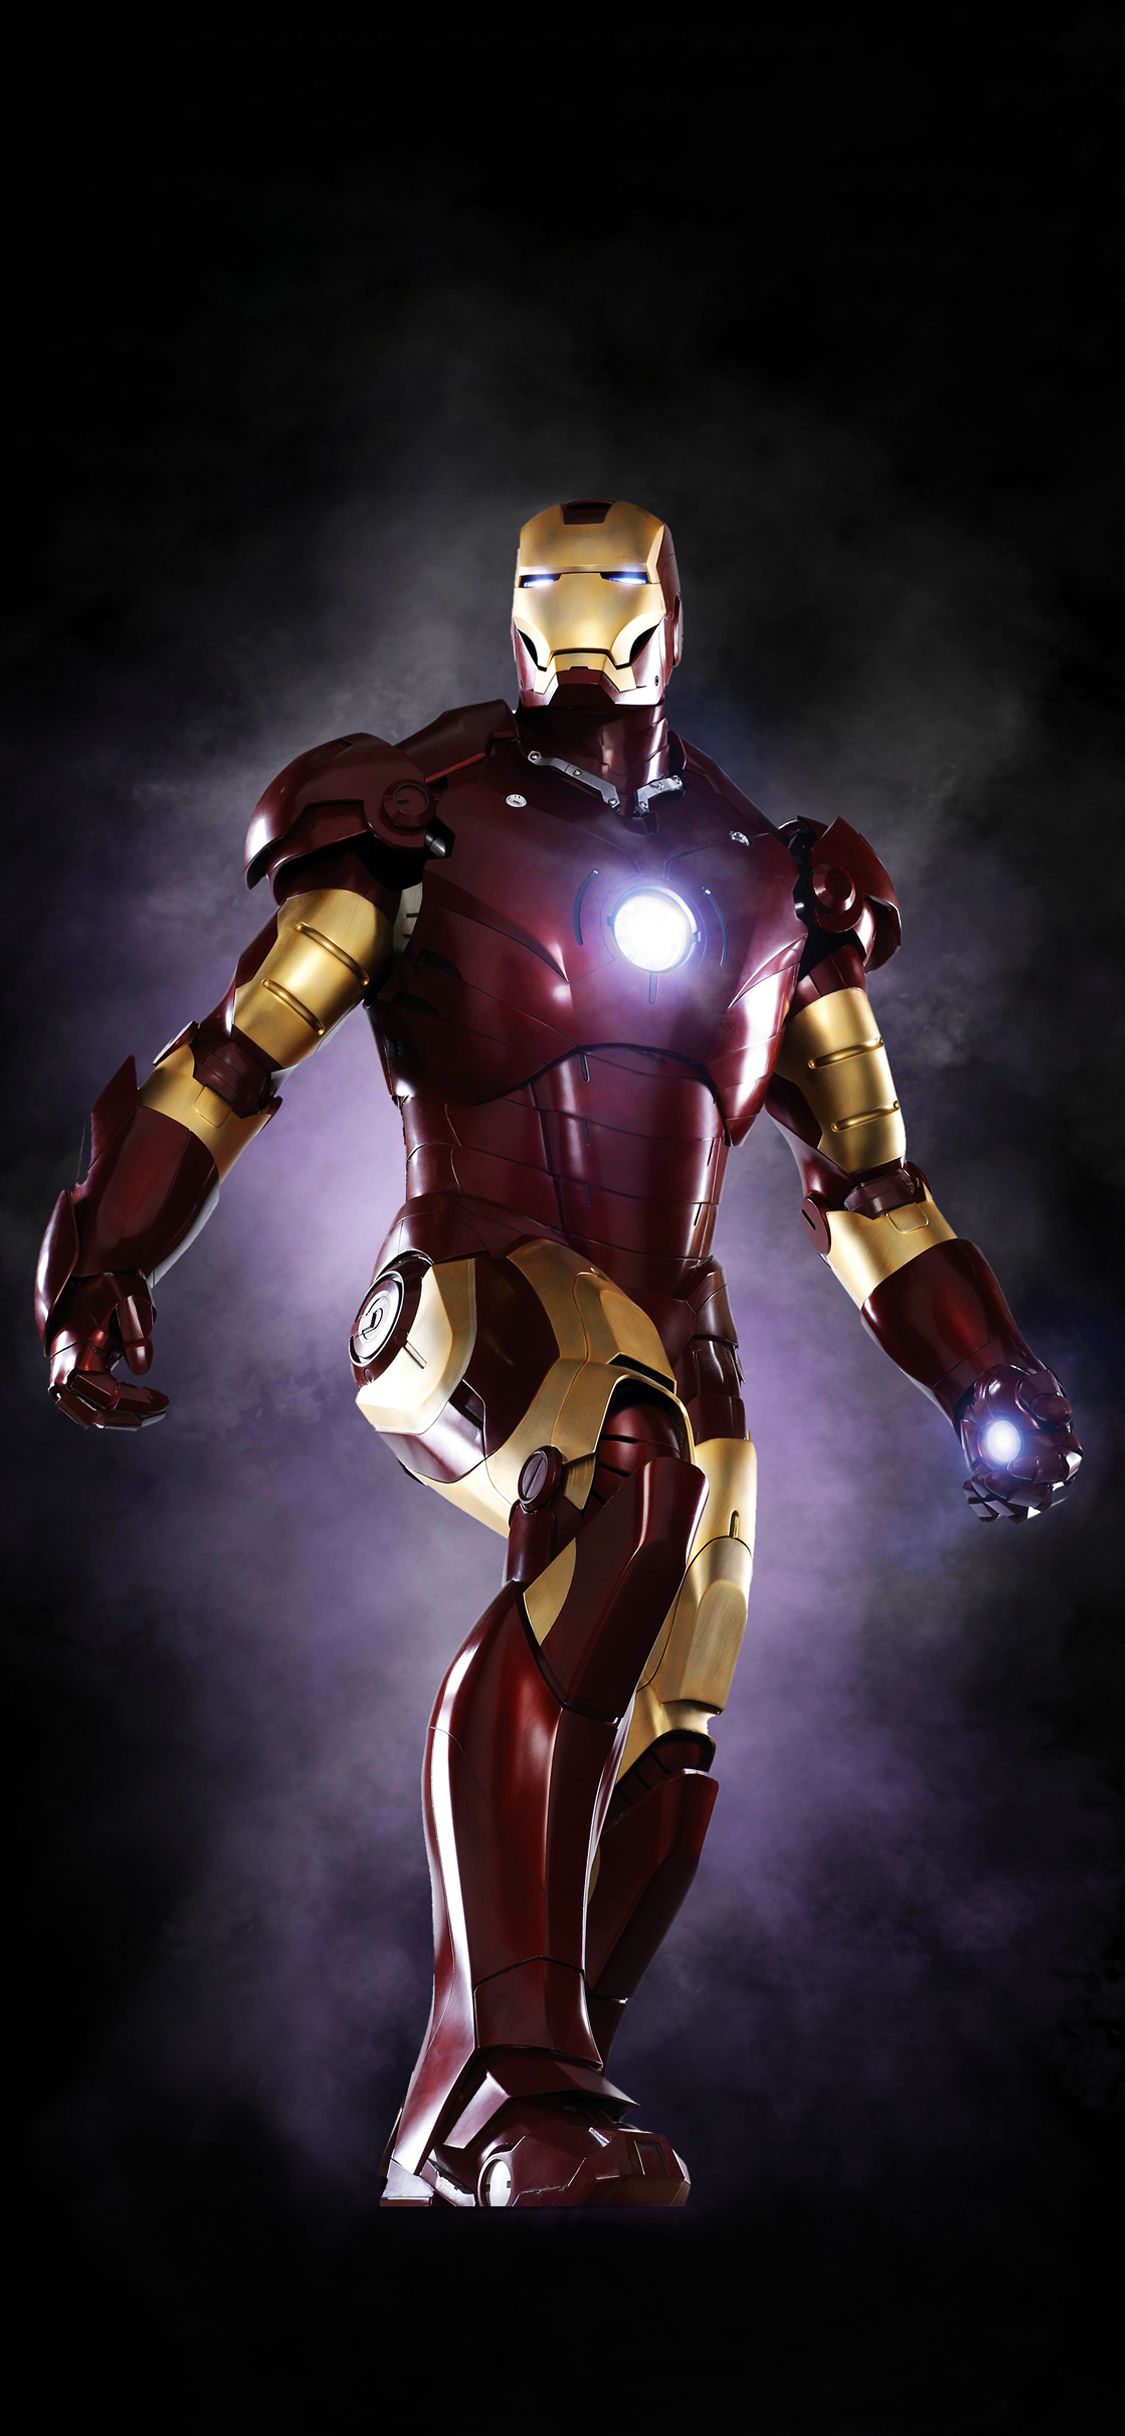 Cool Iron Man Poster Wallpapers